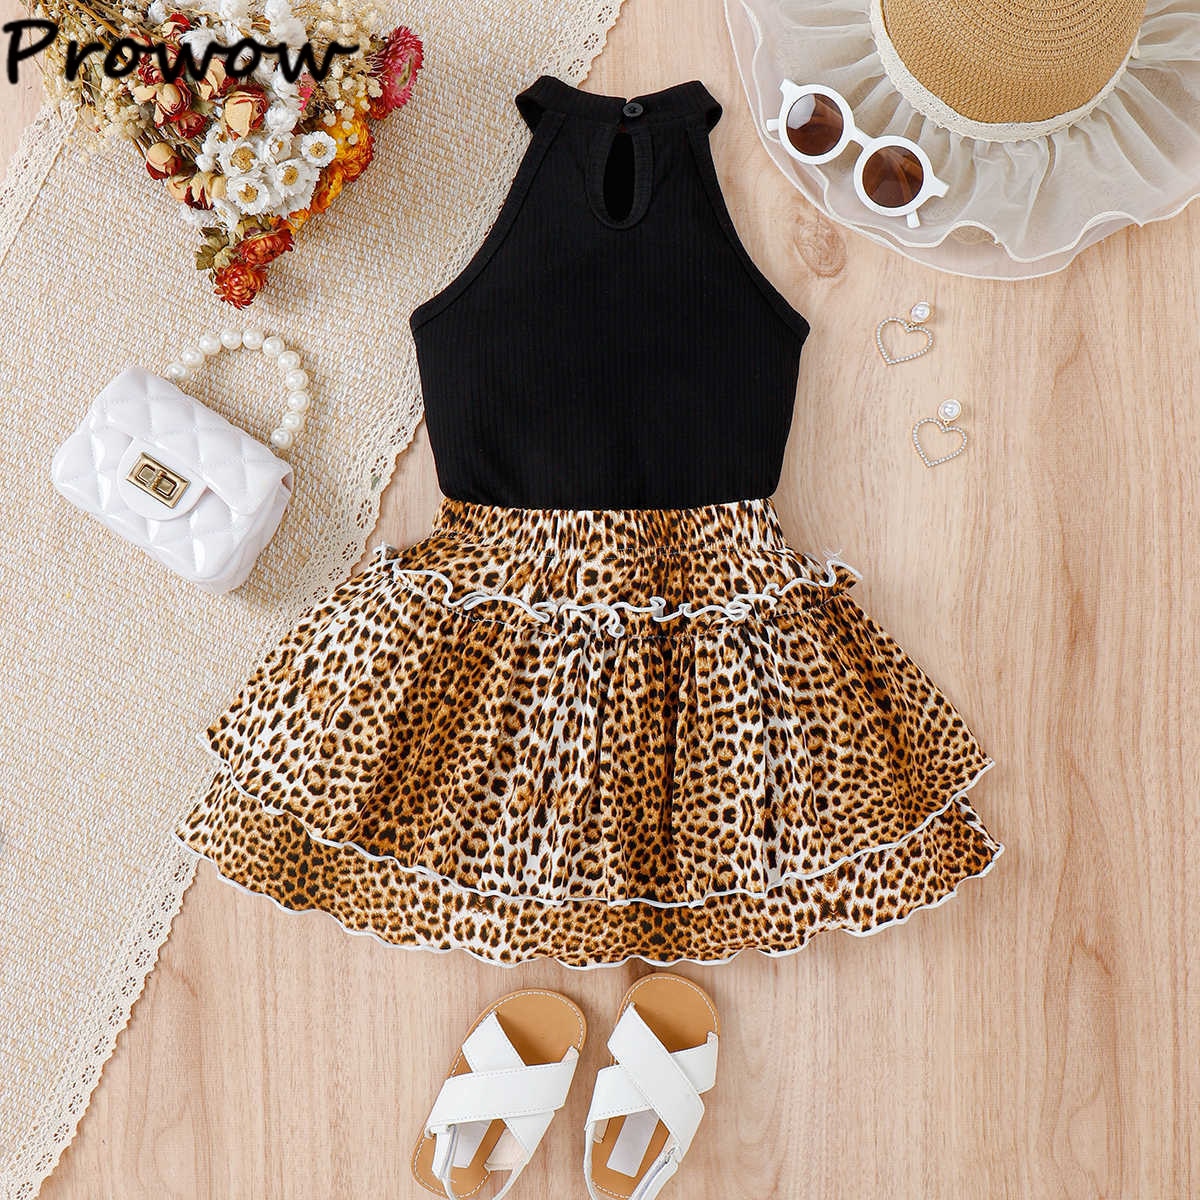 Prowow-4-7Y-Children-Skirts-Sets-For-Girls-Halter-Heart-Top-and-Frill-Cake-Skirt-Leopard-2